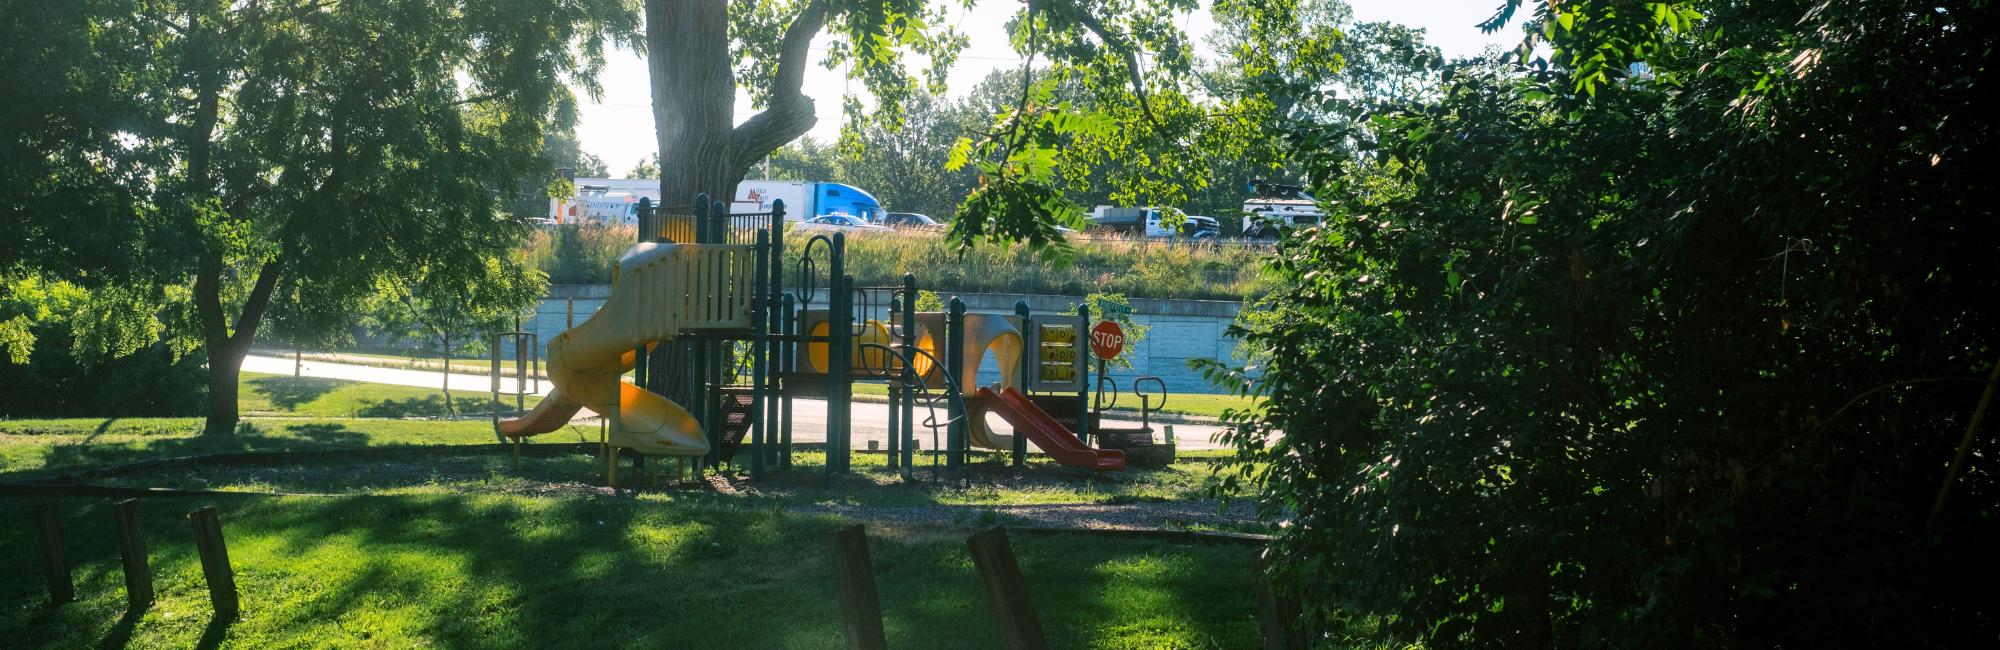 park in a shaded area with trees surrounding a playground